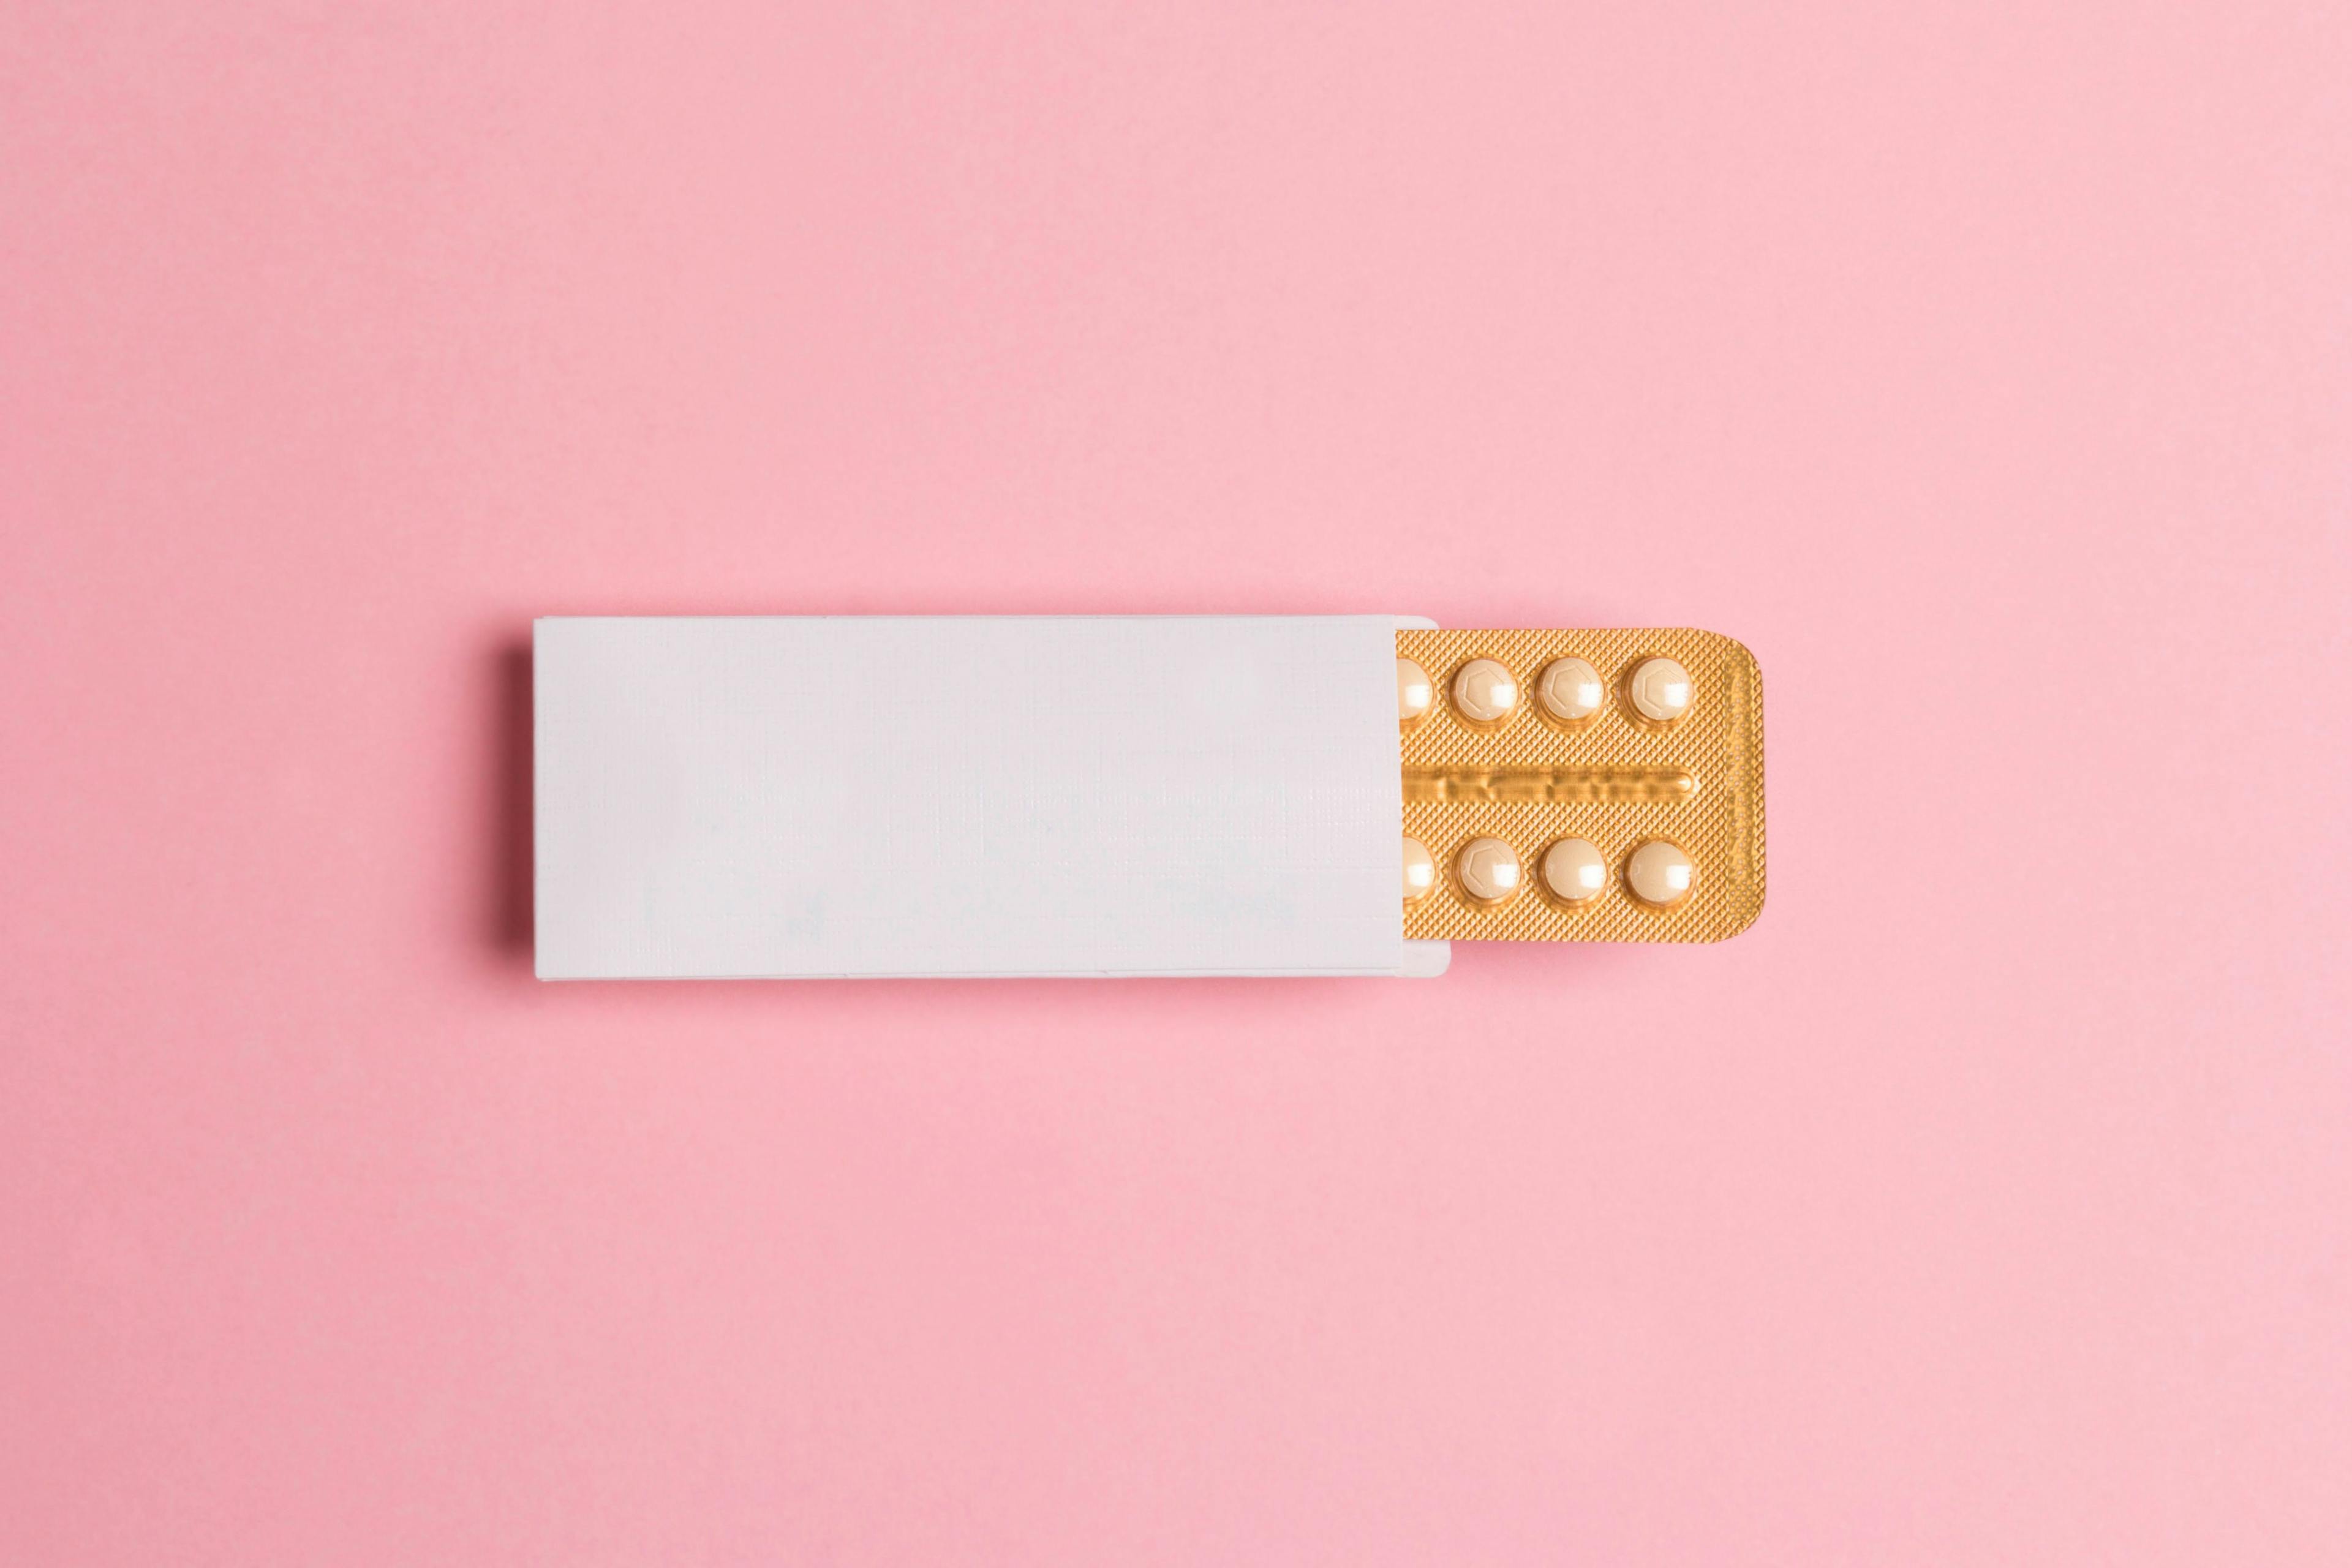 Preventing unintended pregnancies with an OTC progestin-only pill